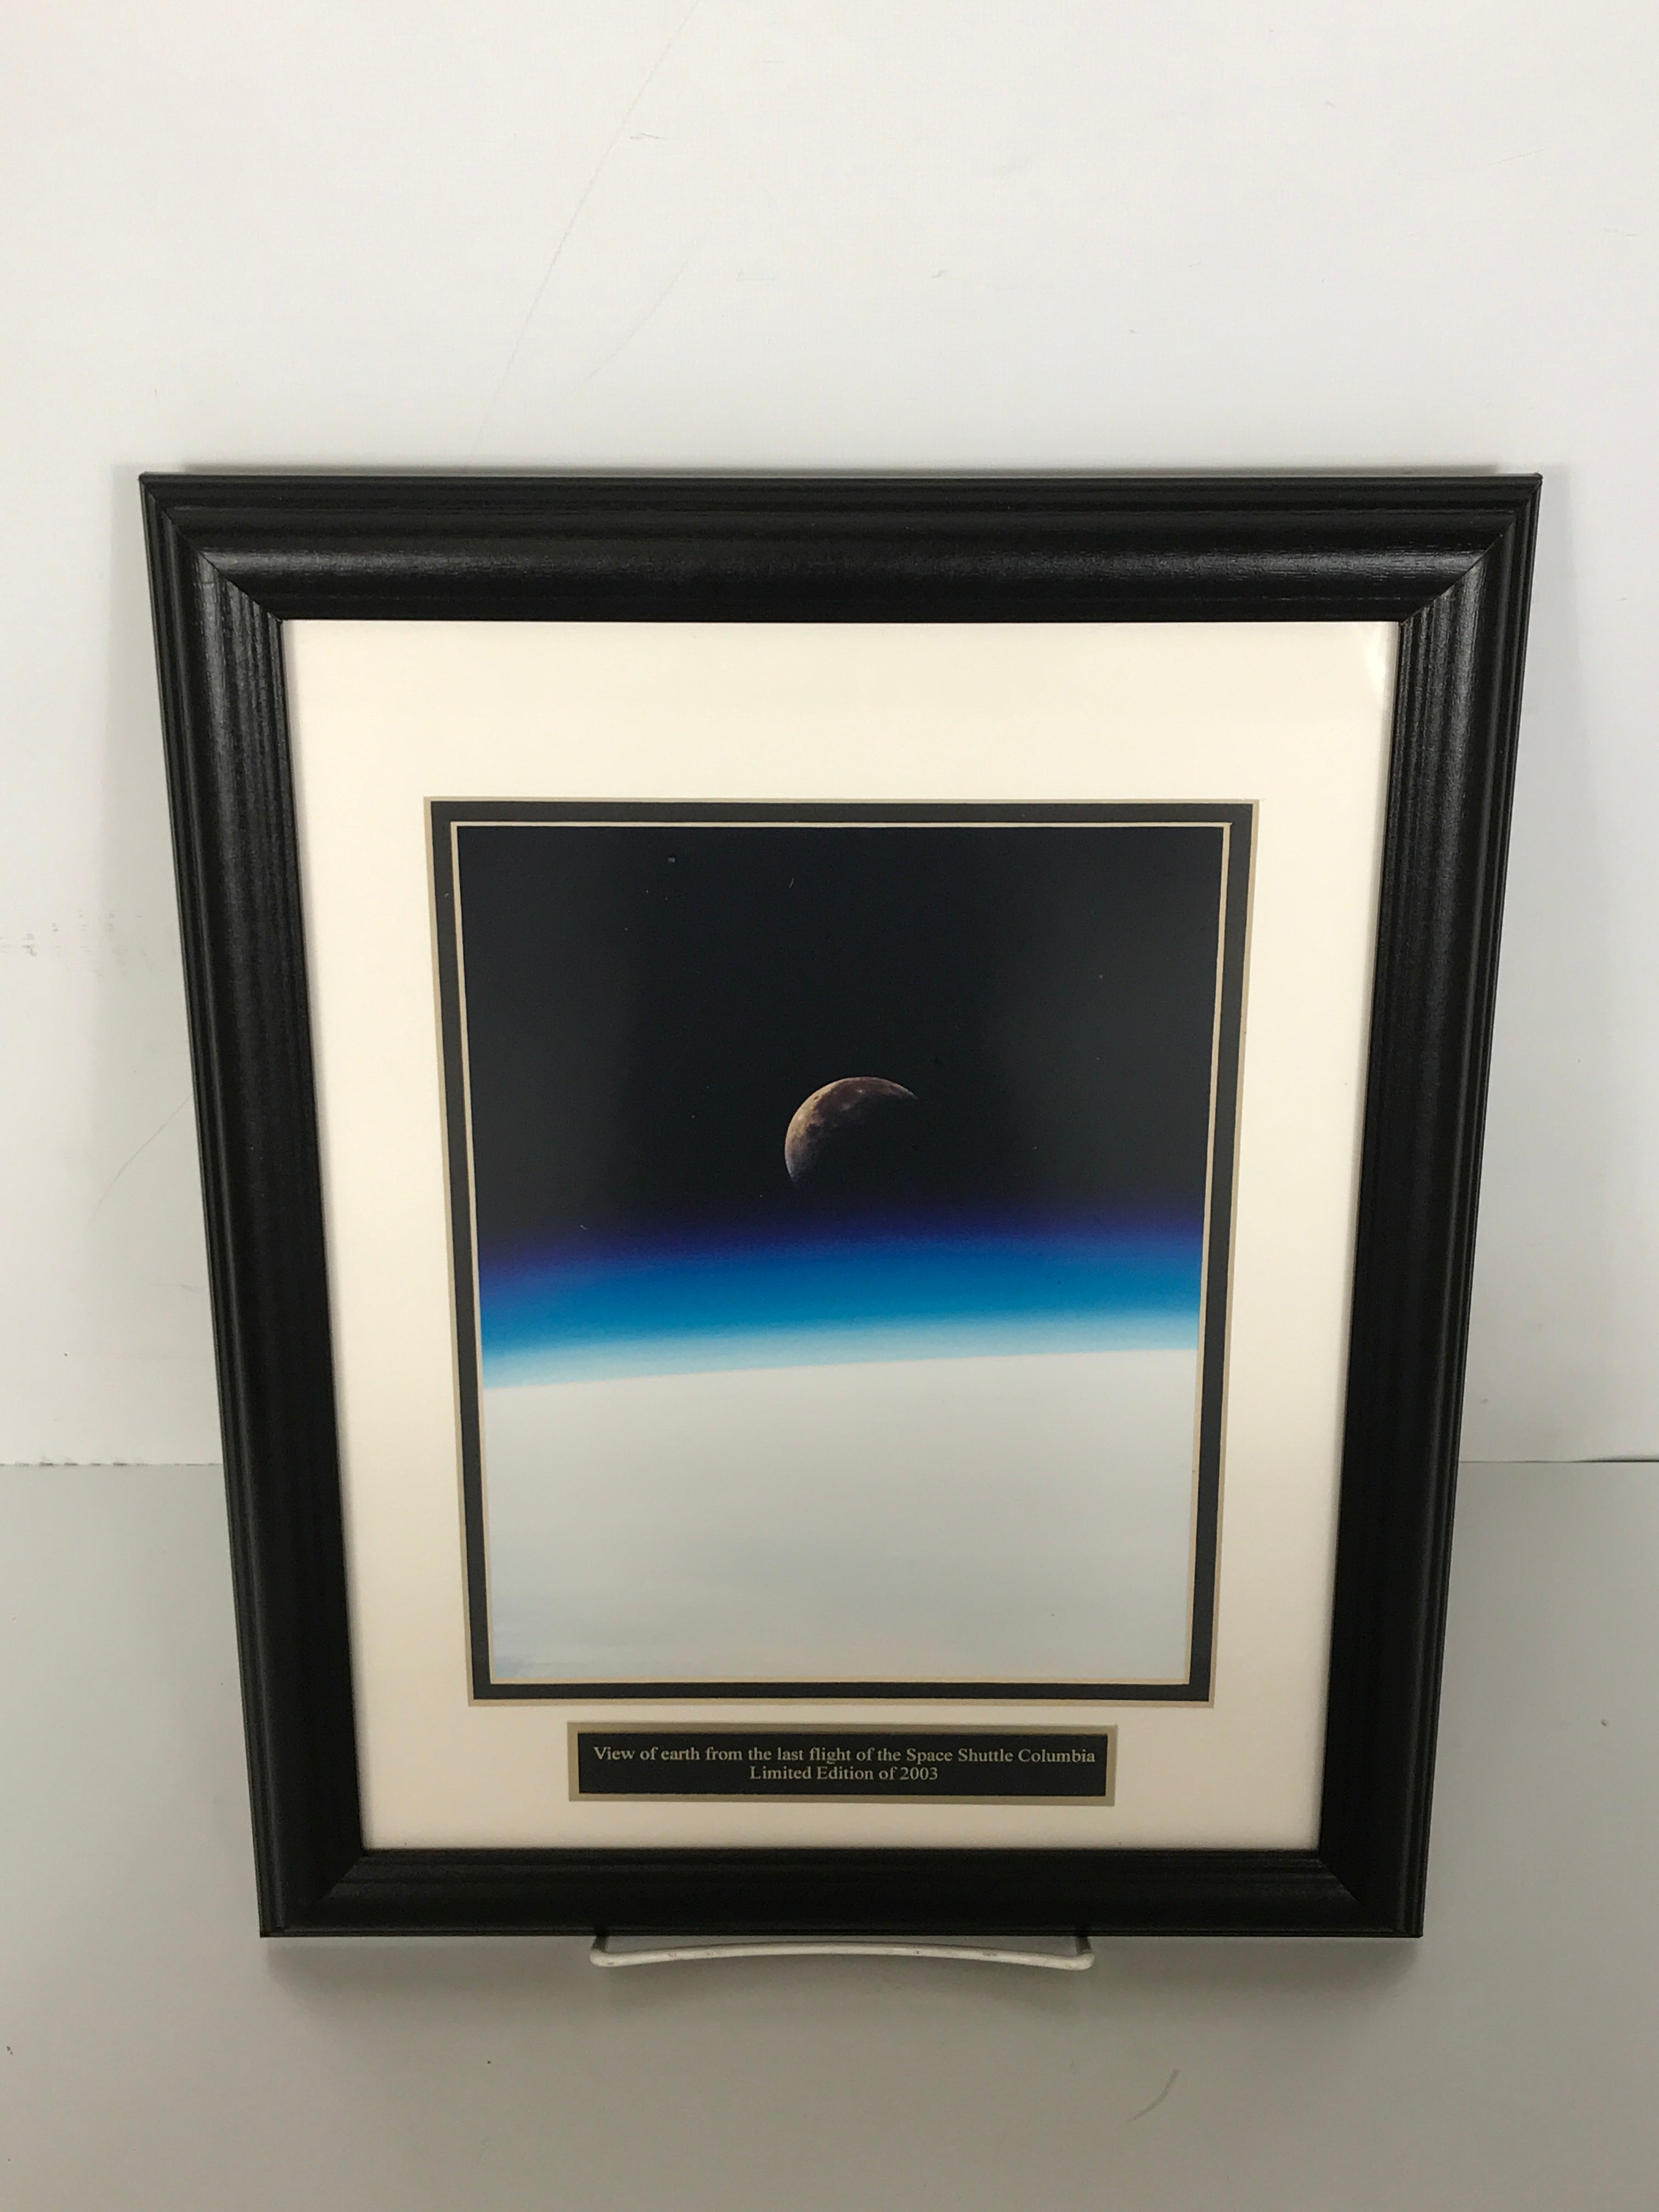 Framed Photo Limited Edition "View of Earth from Space Shuttle Columbia Last Flight"